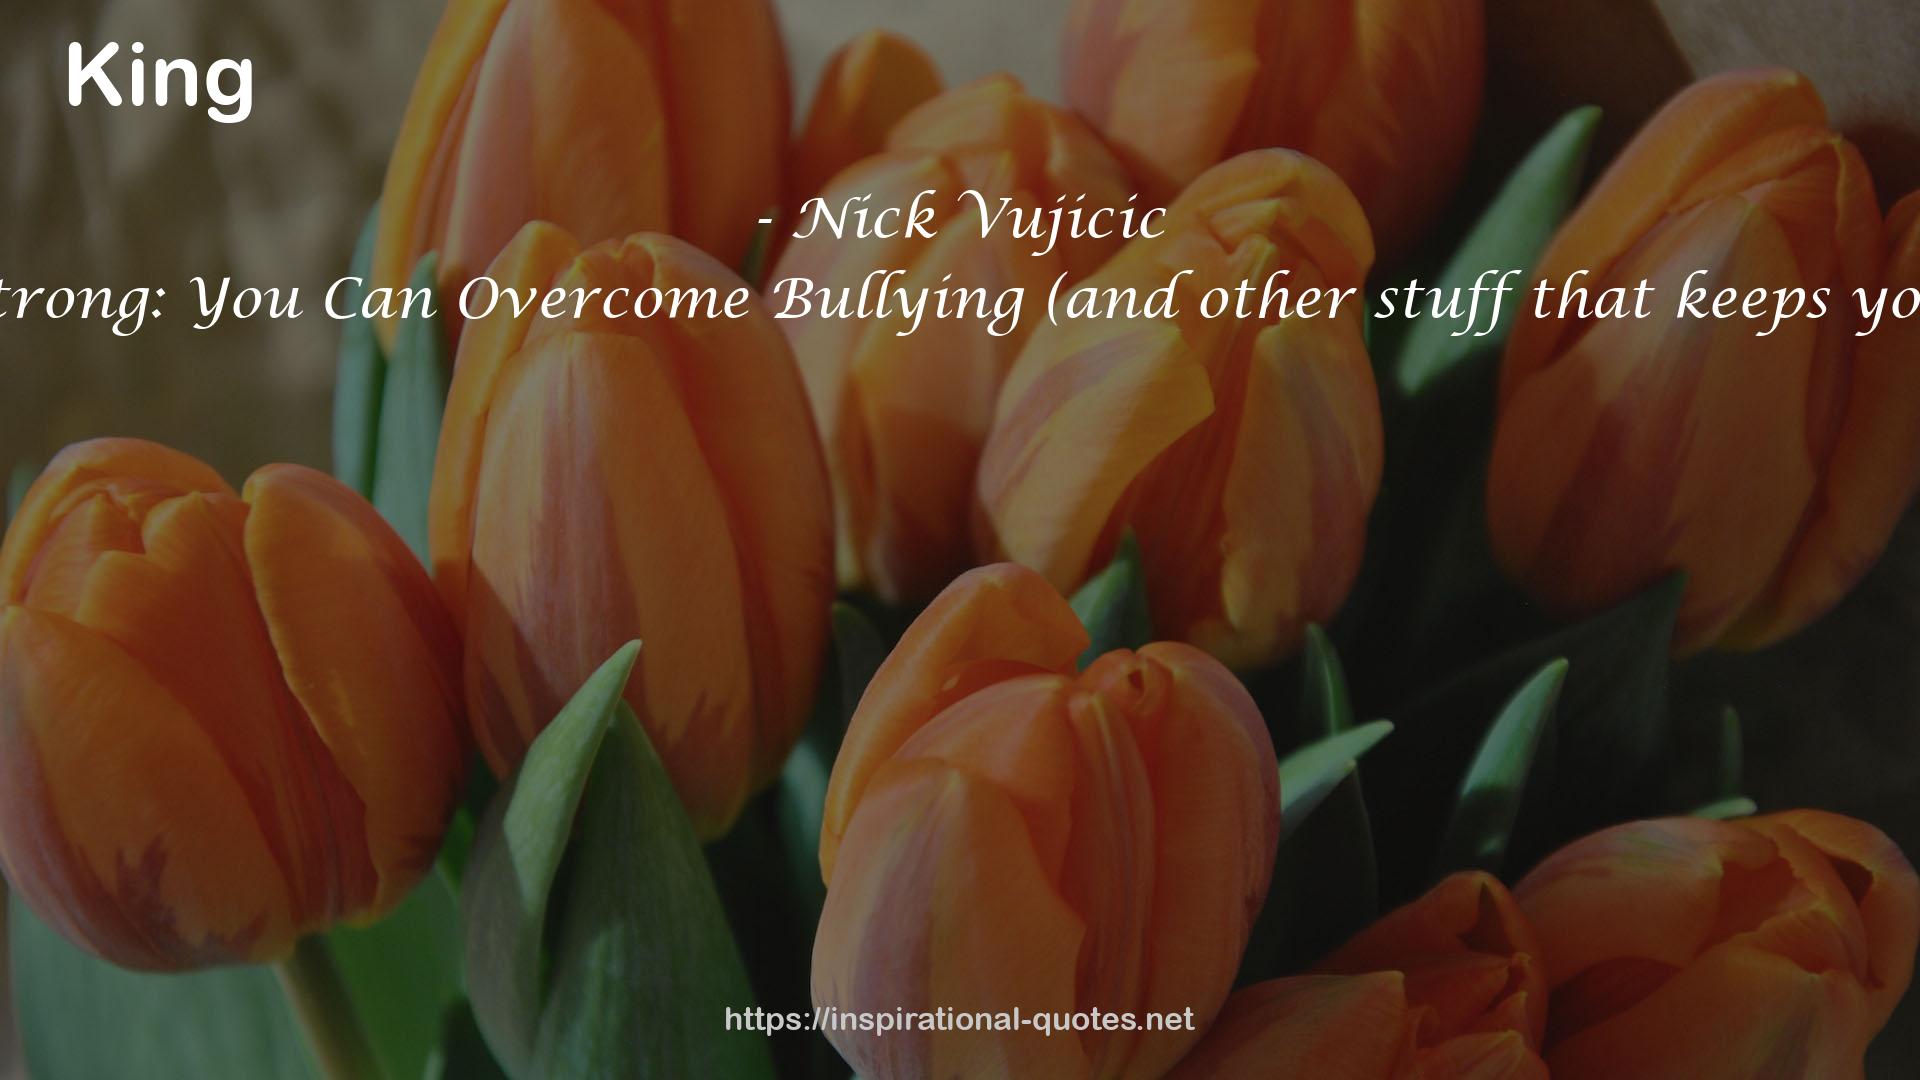 Stand Strong: You Can Overcome Bullying (and other stuff that keeps you down) QUOTES